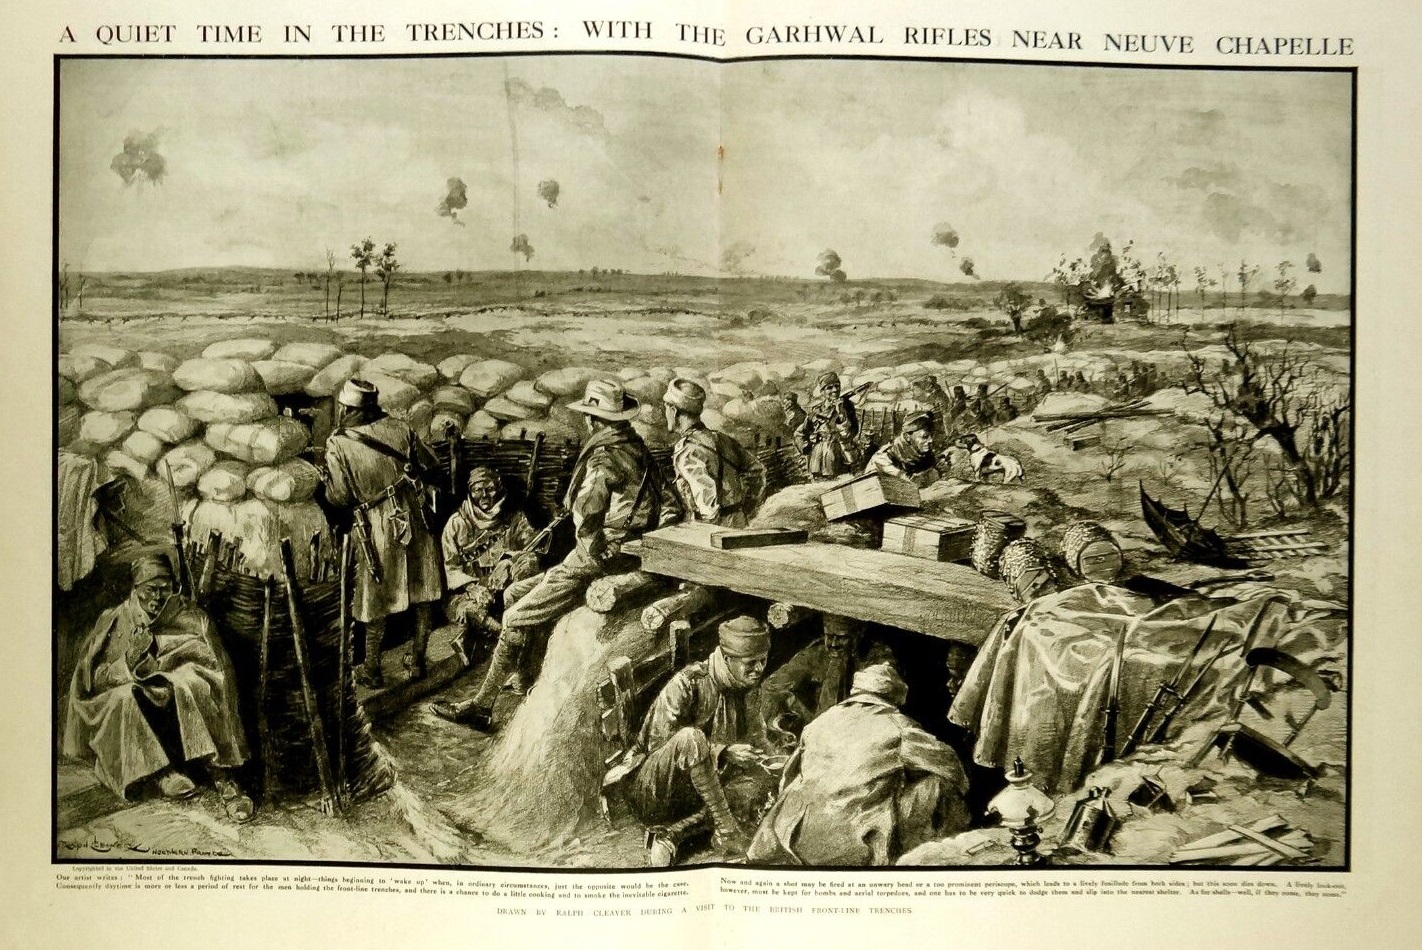 Garhwal Rifles Neuve Chapelle in August 1915 published in the Graphic